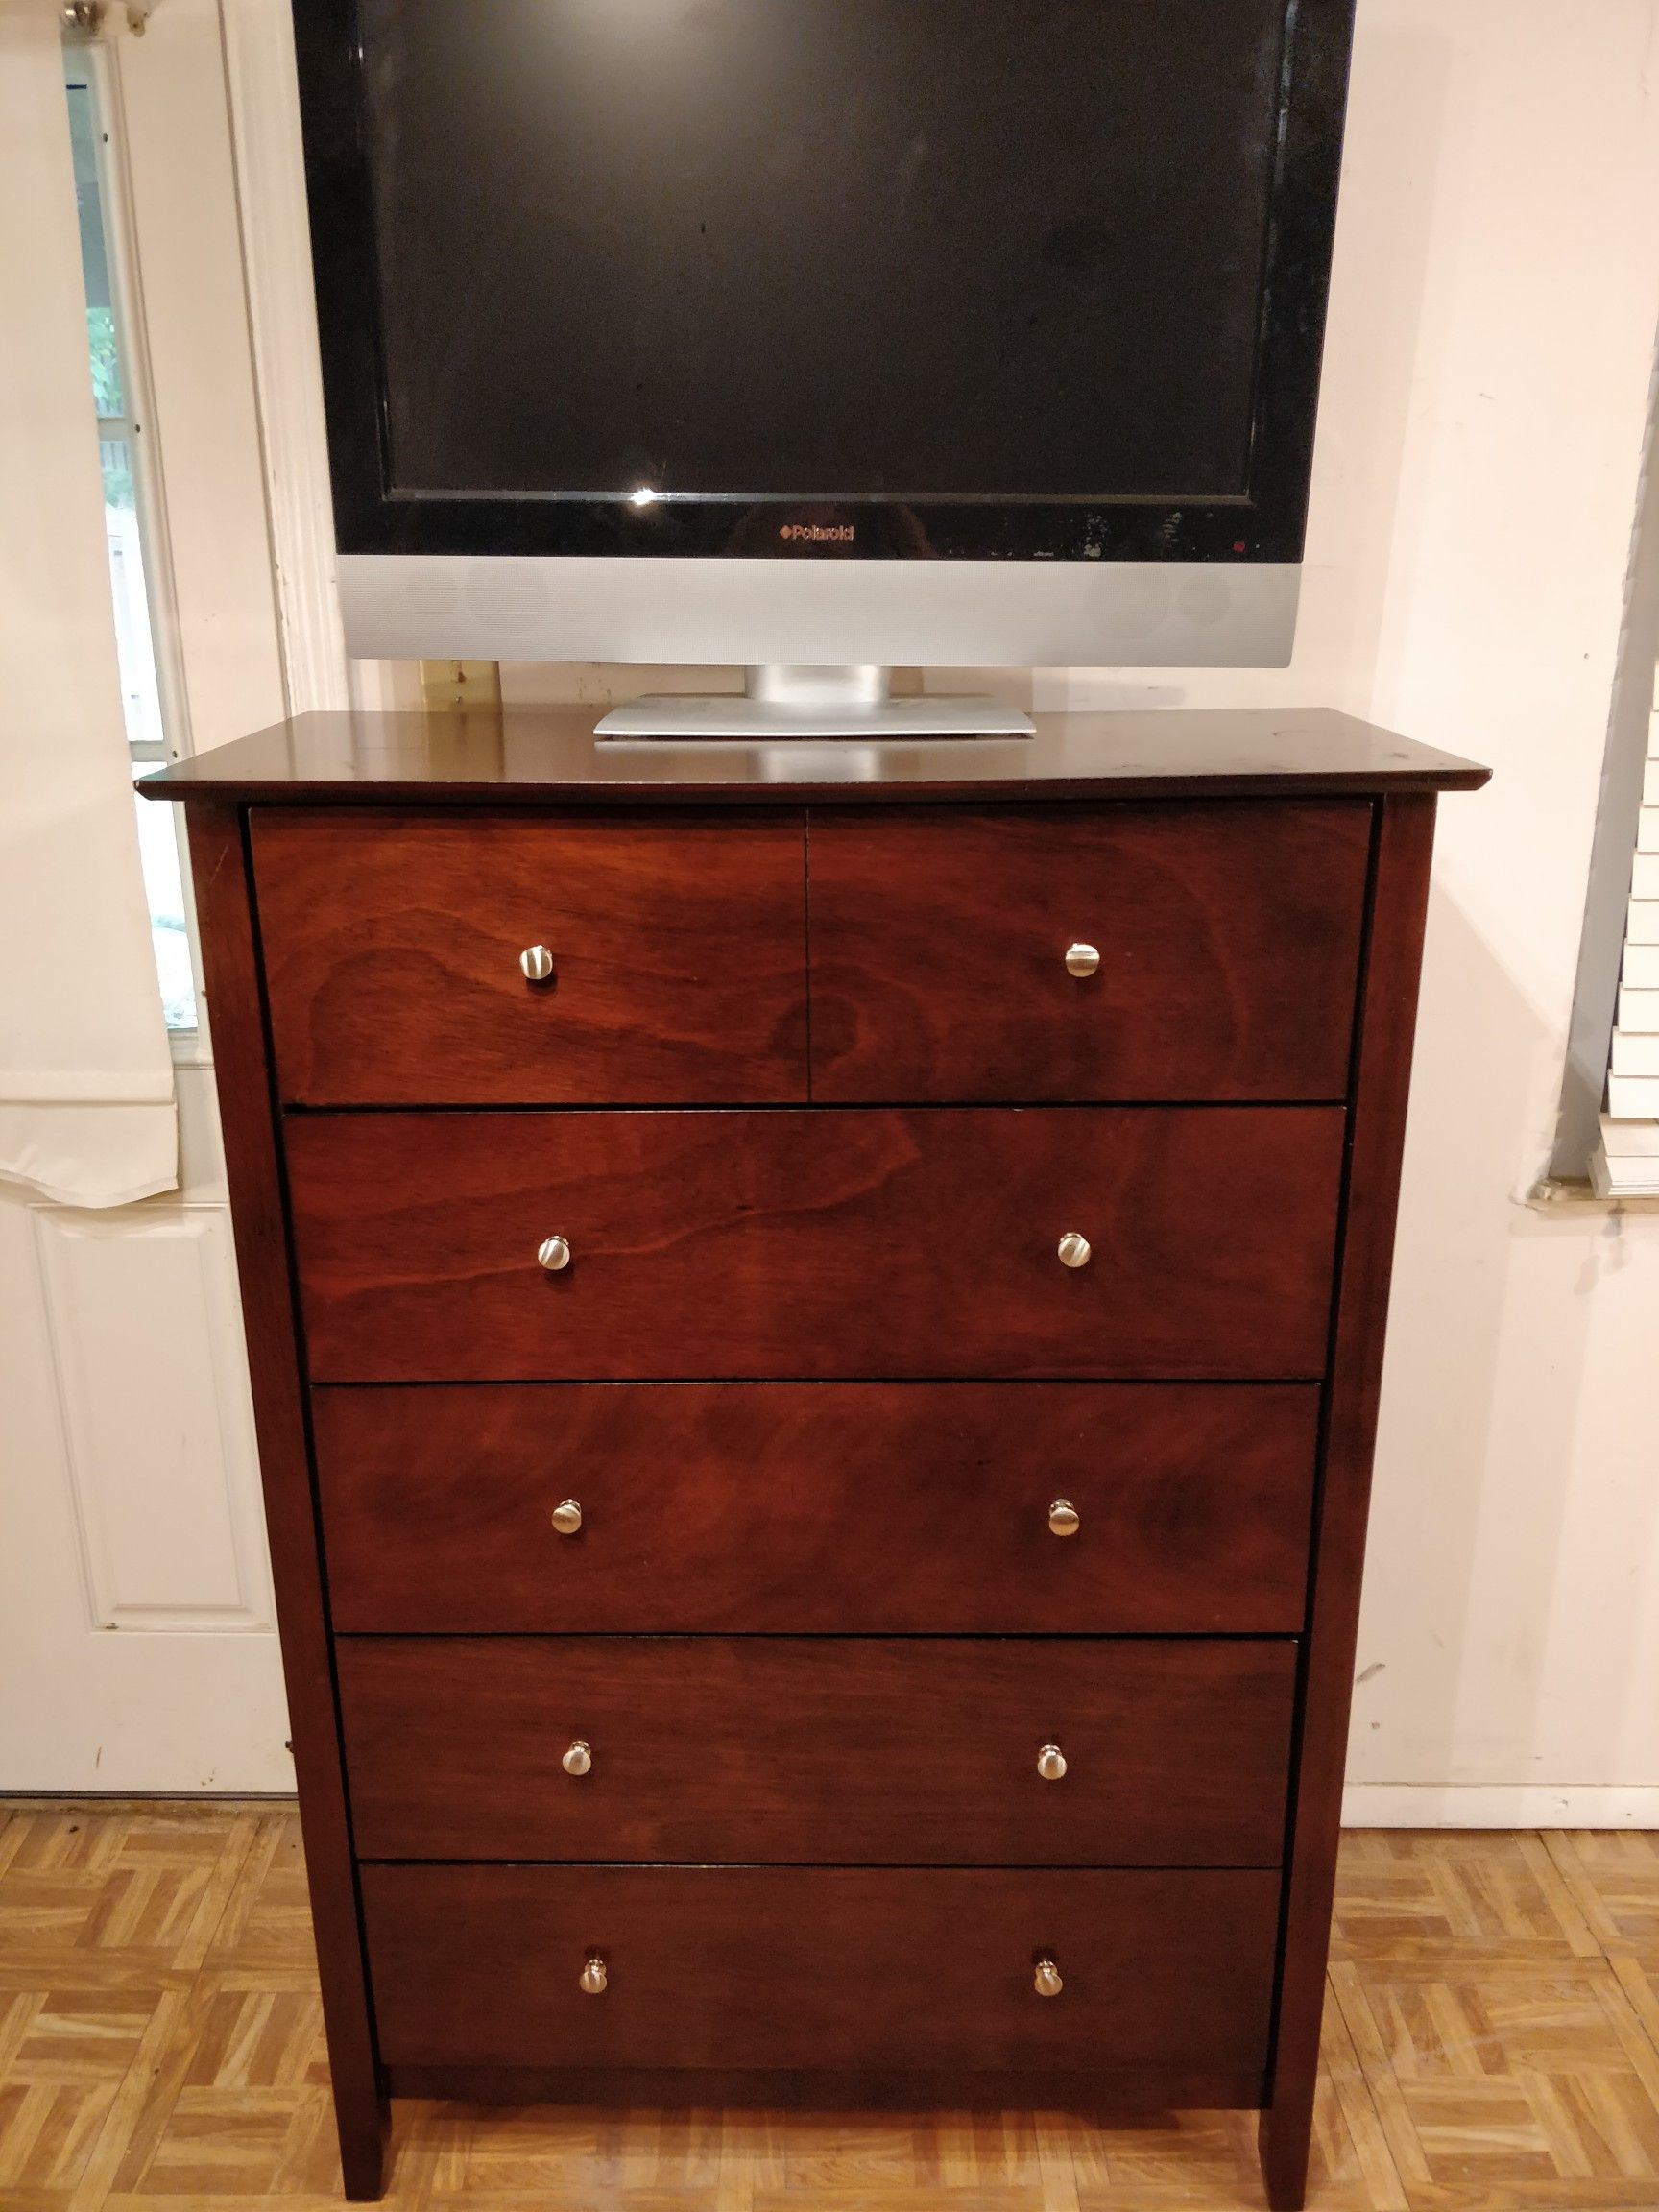 Nice big chest dresser/TV stand in very good condition, all drawers sliding smoothly. L37"*W17.5"*H52.5"